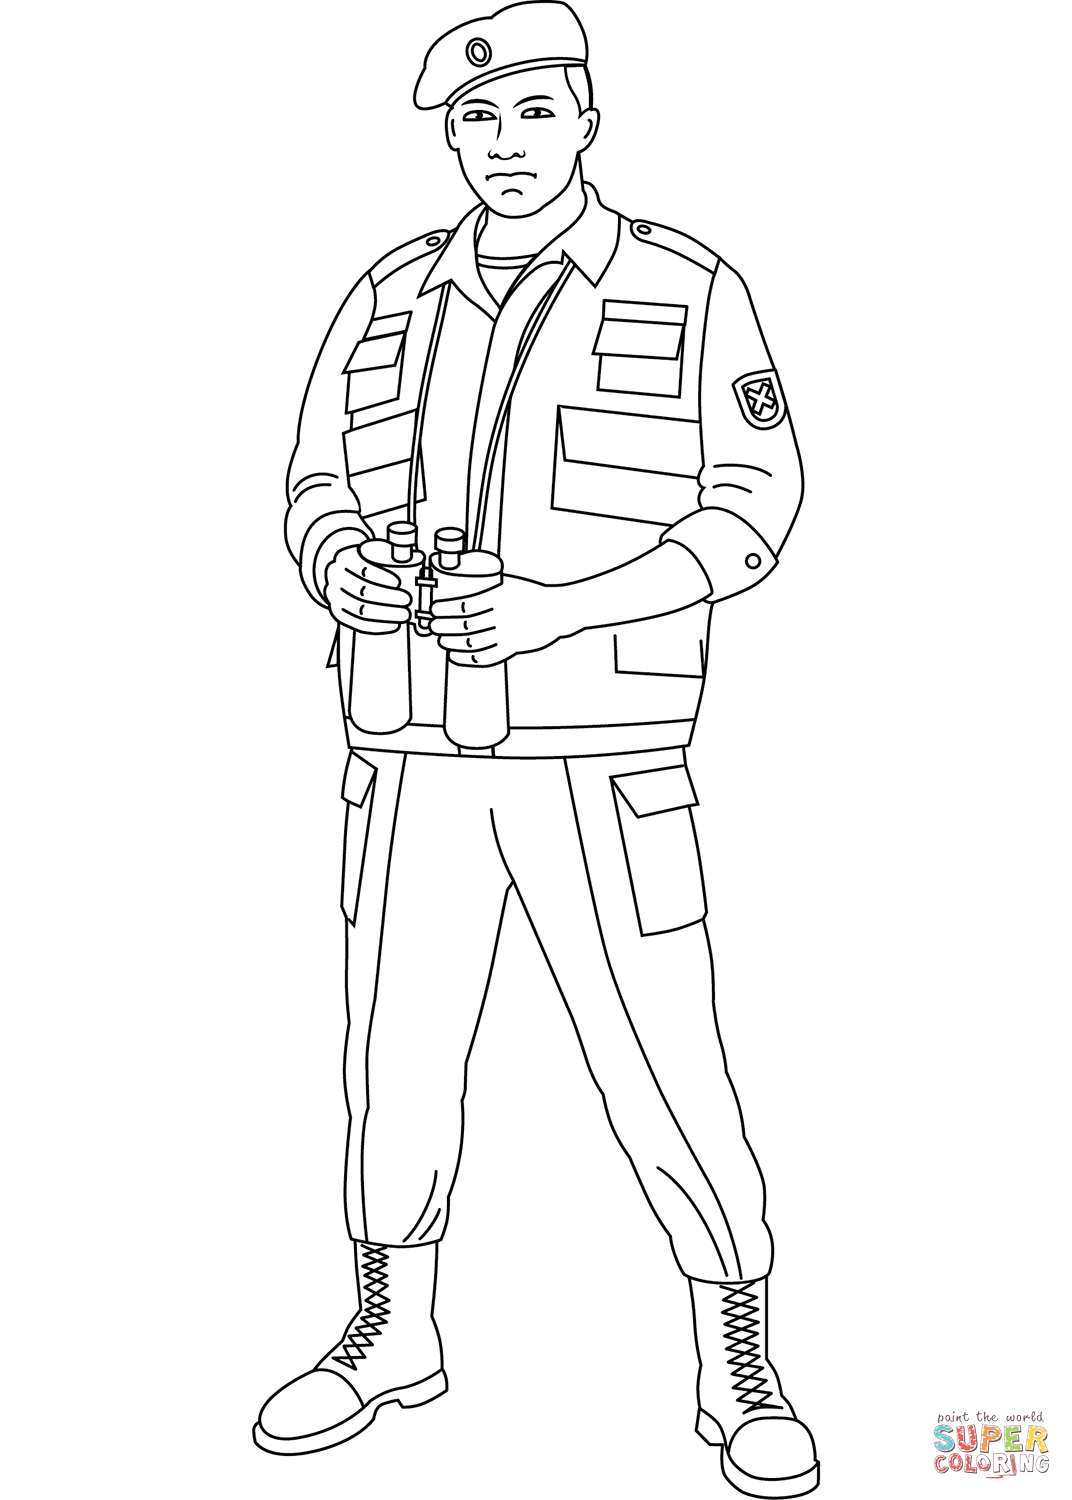 Soldier coloring page free printable coloring pages